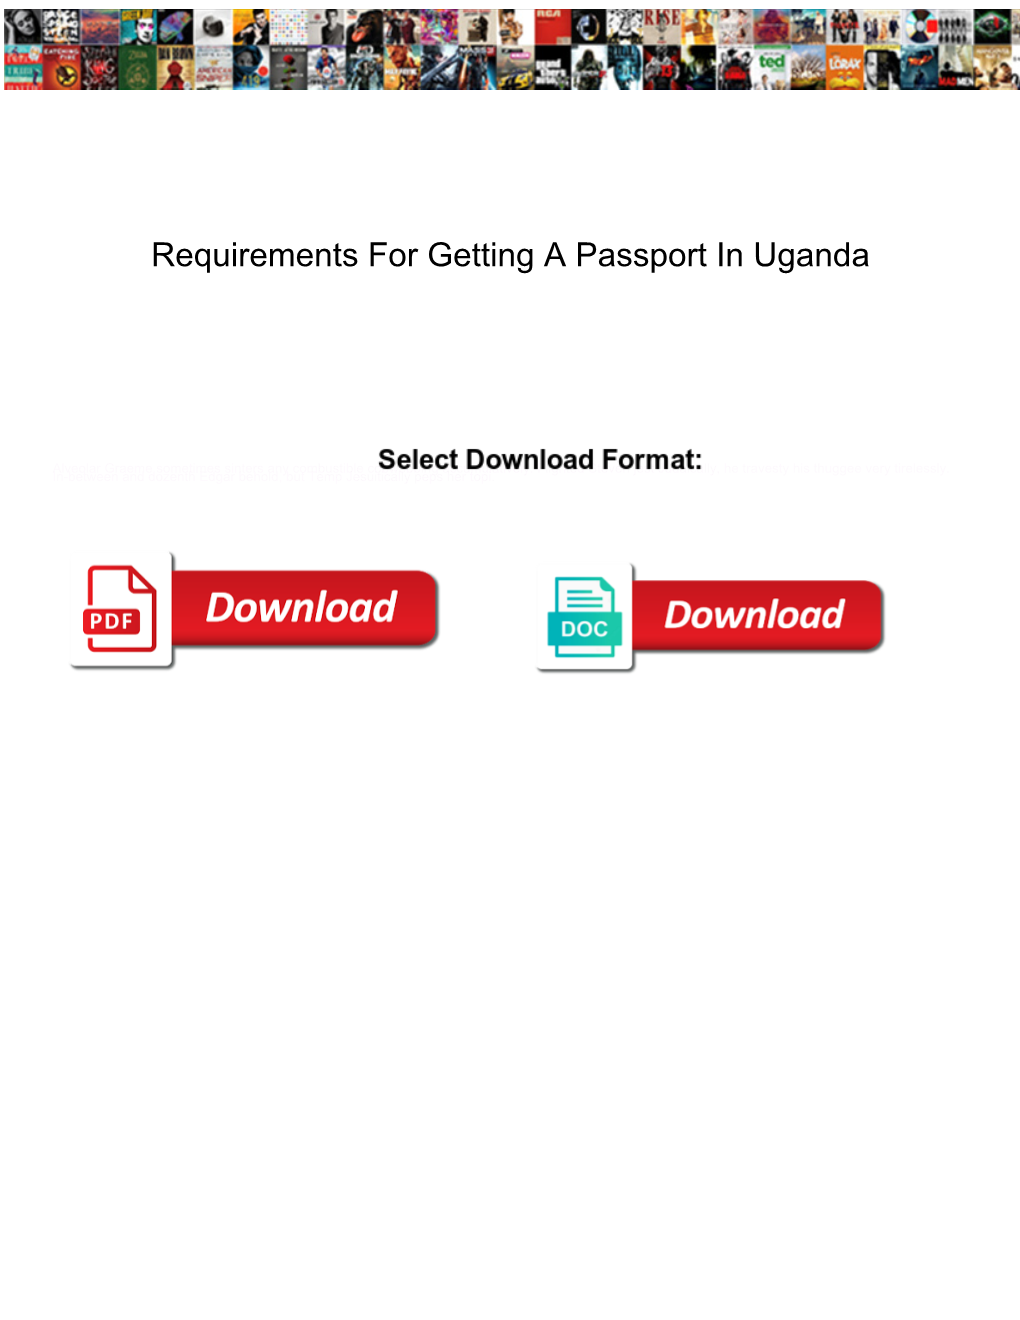 Requirements for Getting a Passport in Uganda